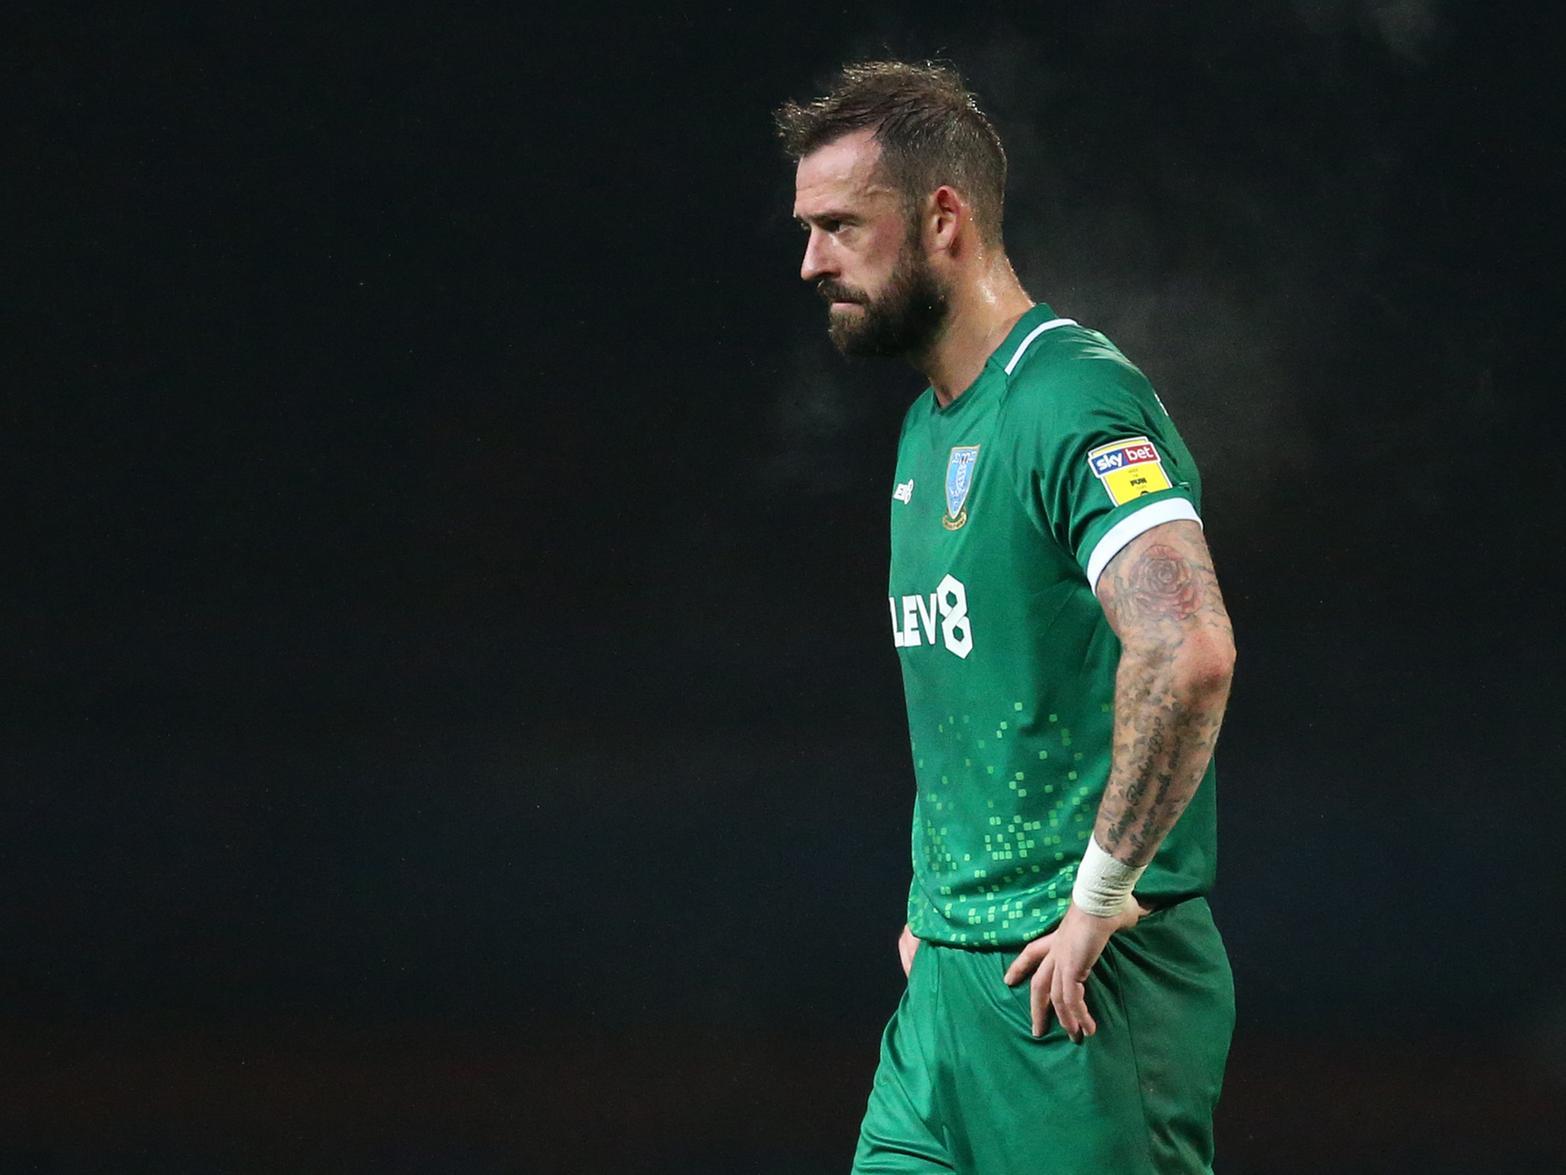 Sheffield Wednesday boss Garry Monk has confirmed that both Morgan Fox and Steven Fletcher are unlikely to start against Charlton Athletic this evening, as they continue their return to match fitness. (Sheffield Star)